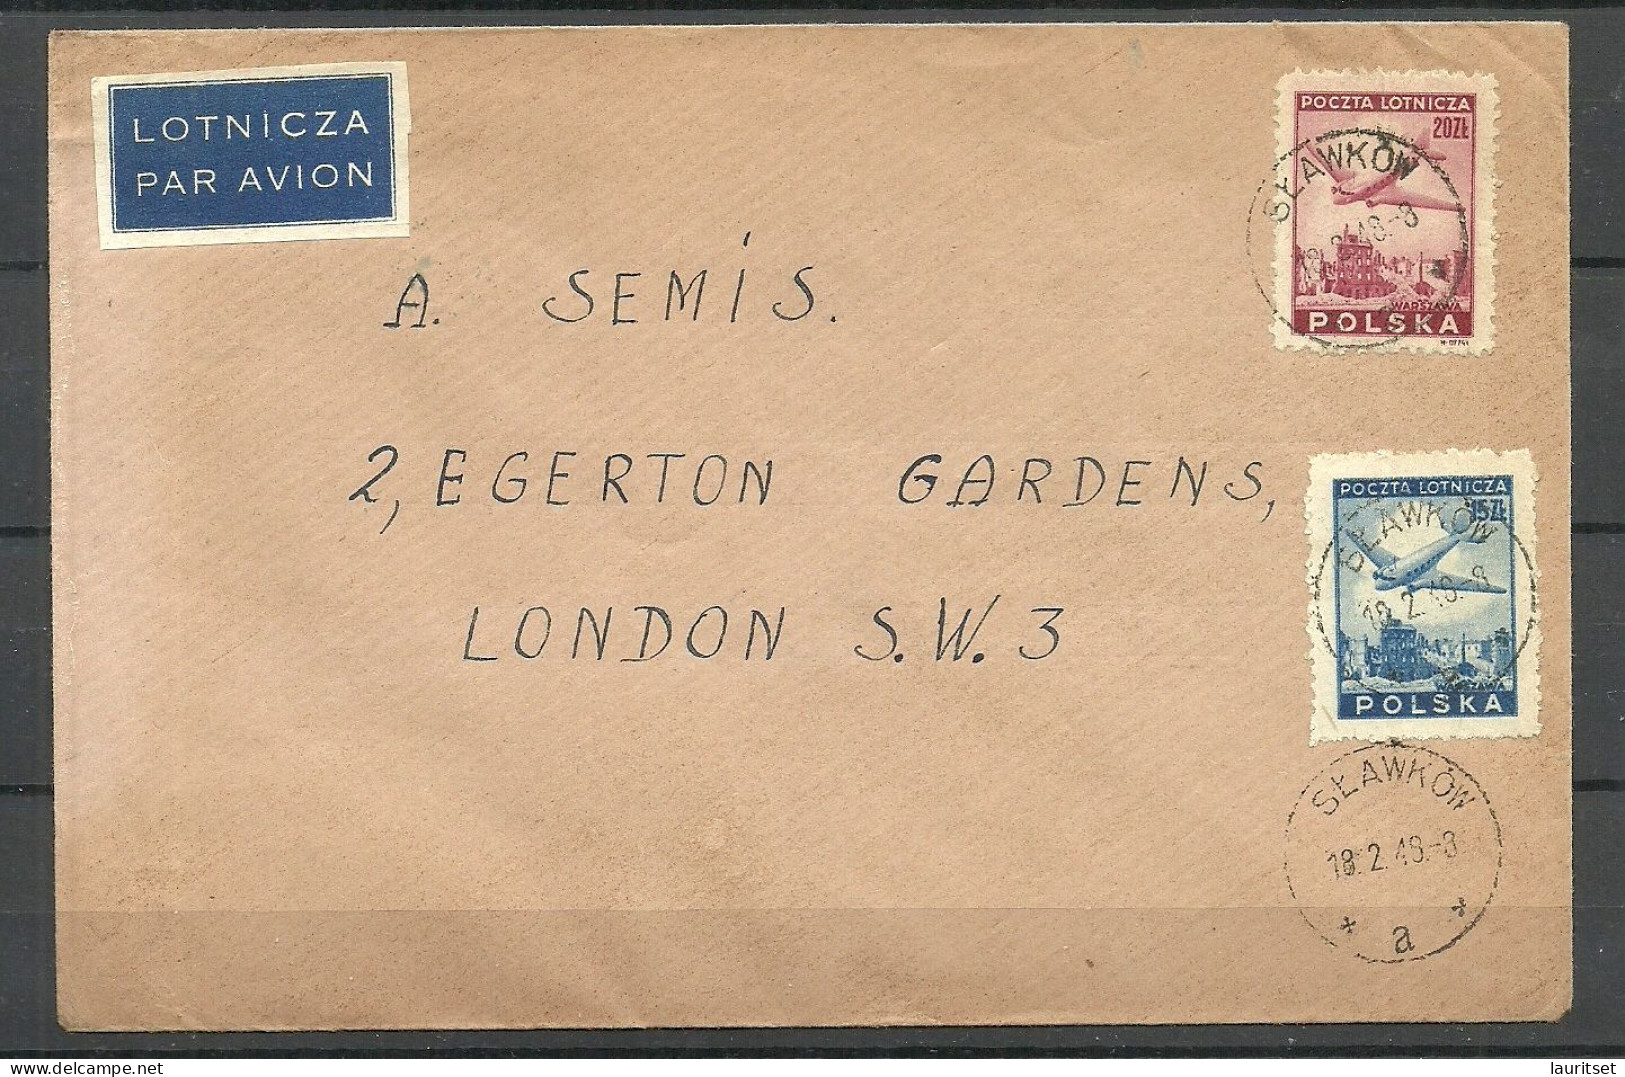 POLEN Poland 1948 Air Mail Cover O SLAWKOW To London Great Britain - Avions